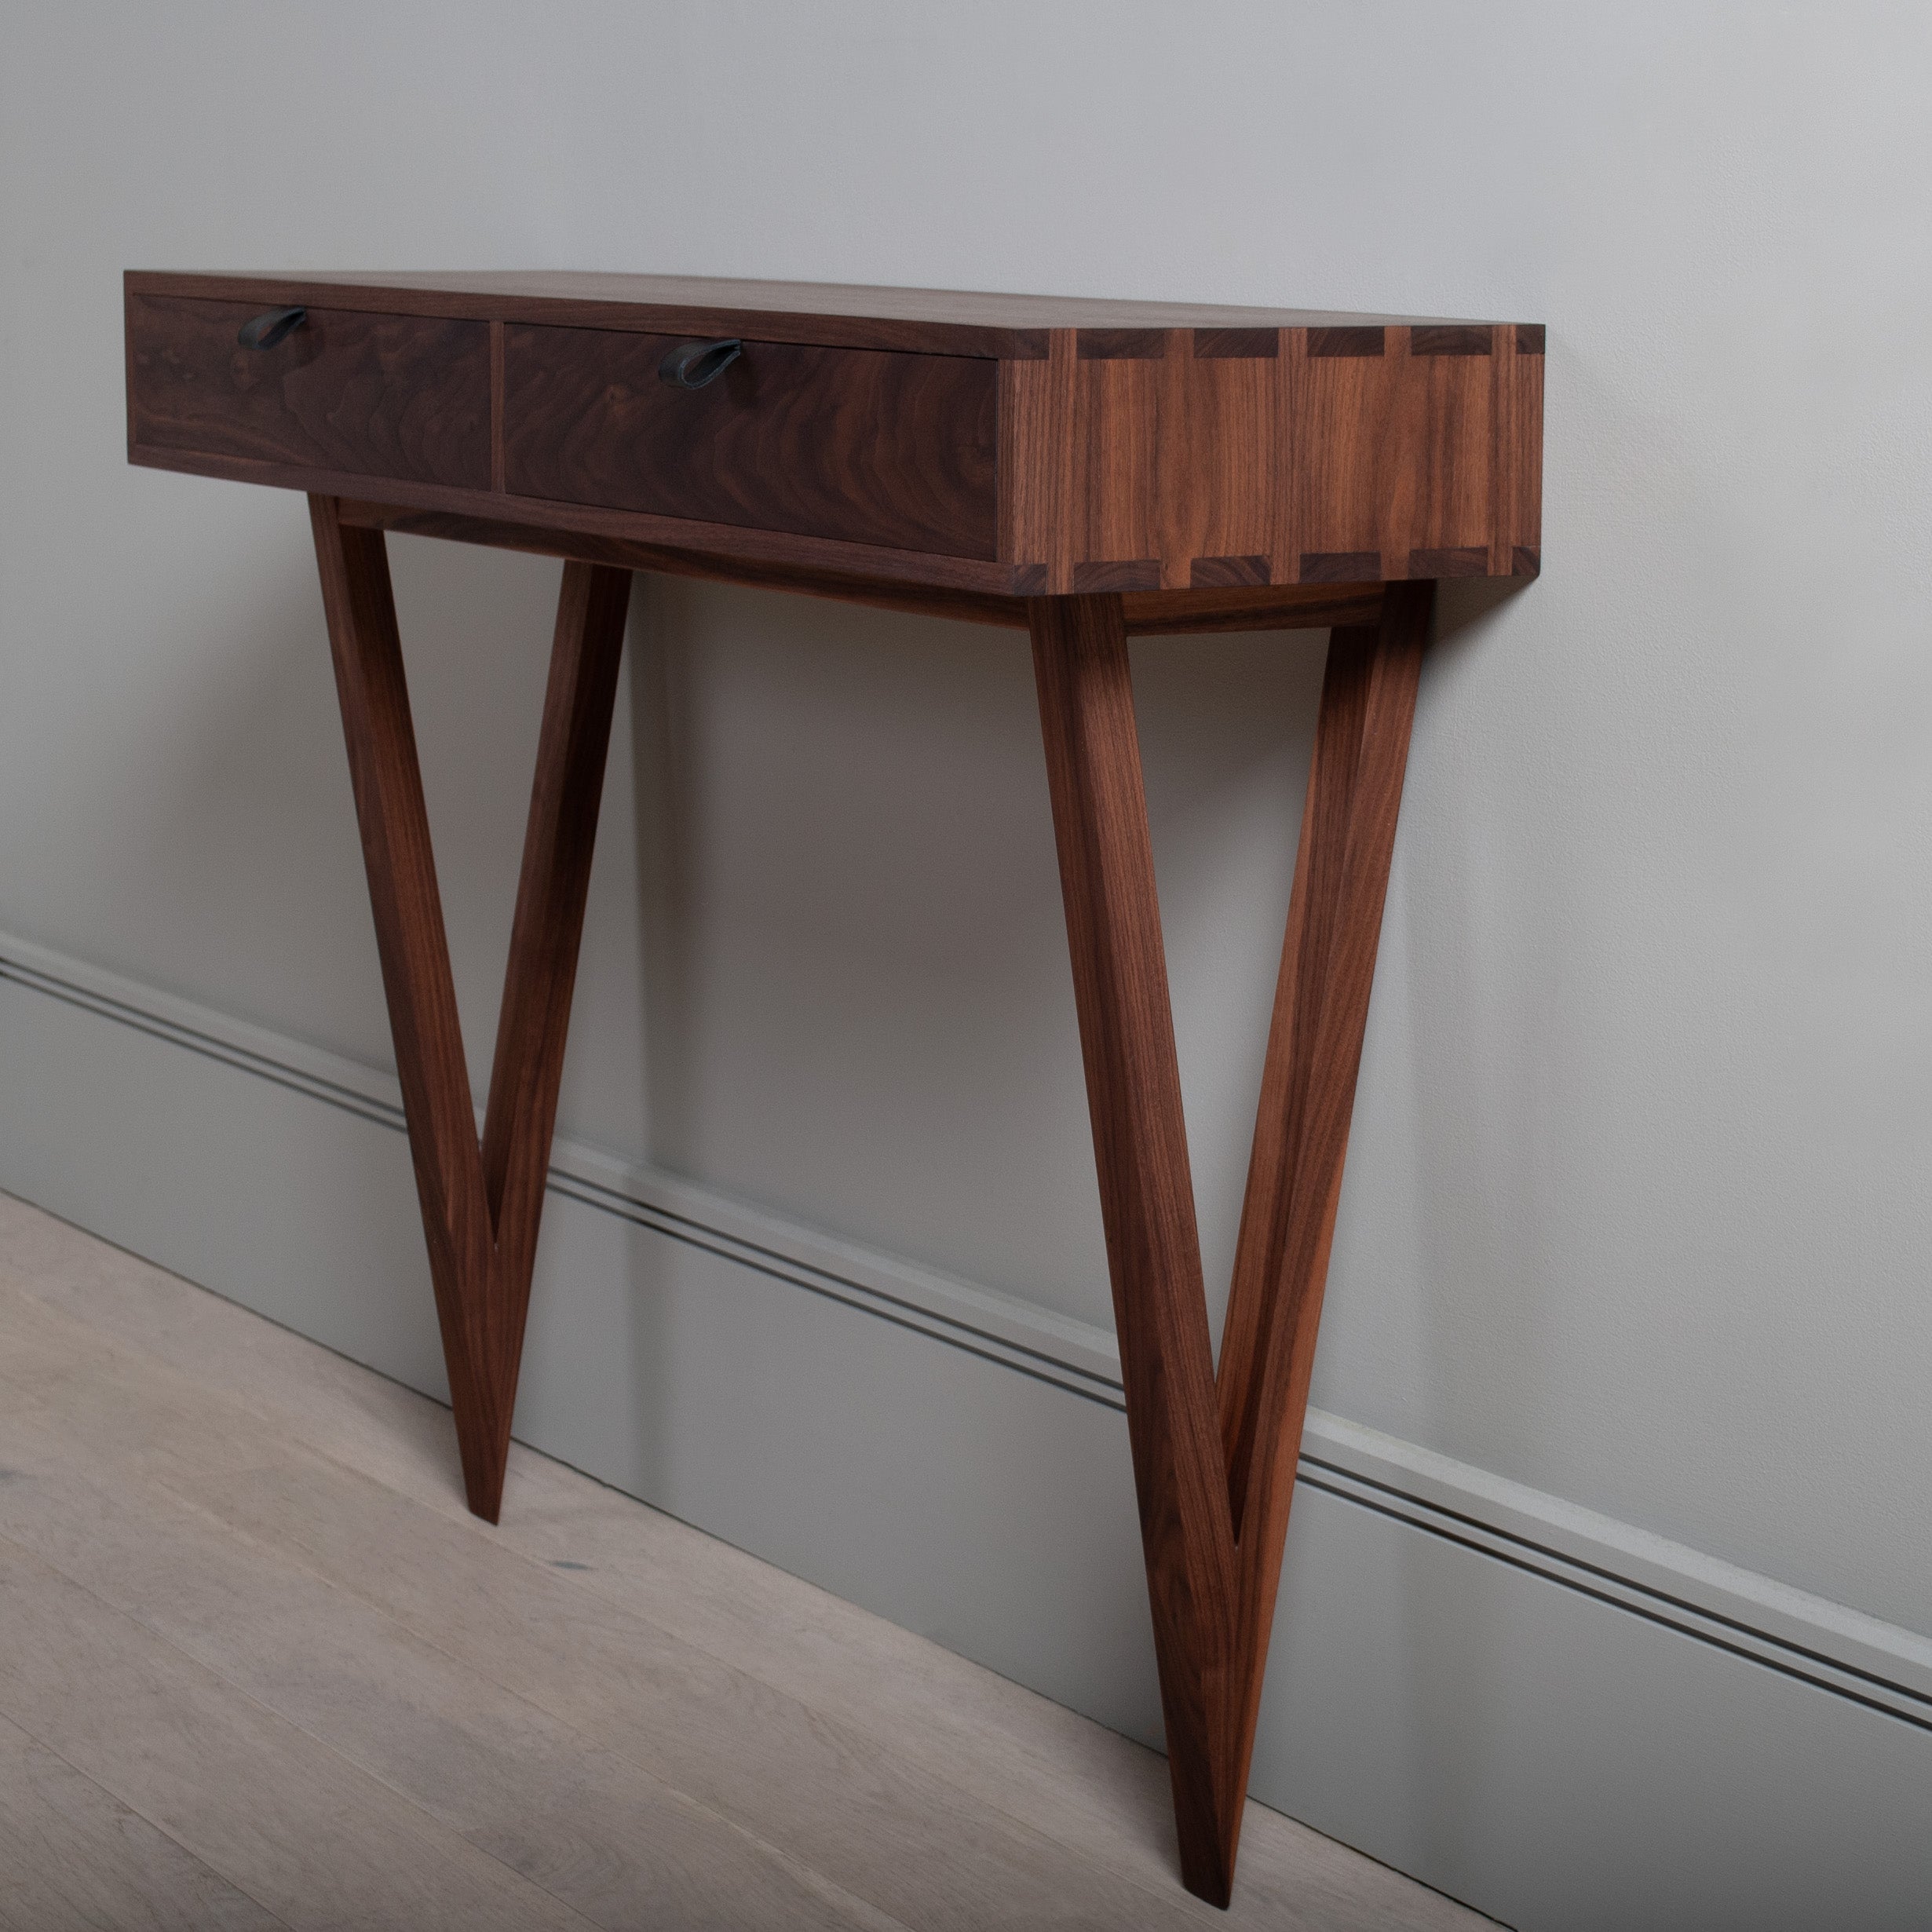 Modernist American black walnut vanity table designed and produced in England using traditional furniture making techniques. Completely handcrafted from the finest American black walnut. Hand dovetailed joints to the main console drawer box and all